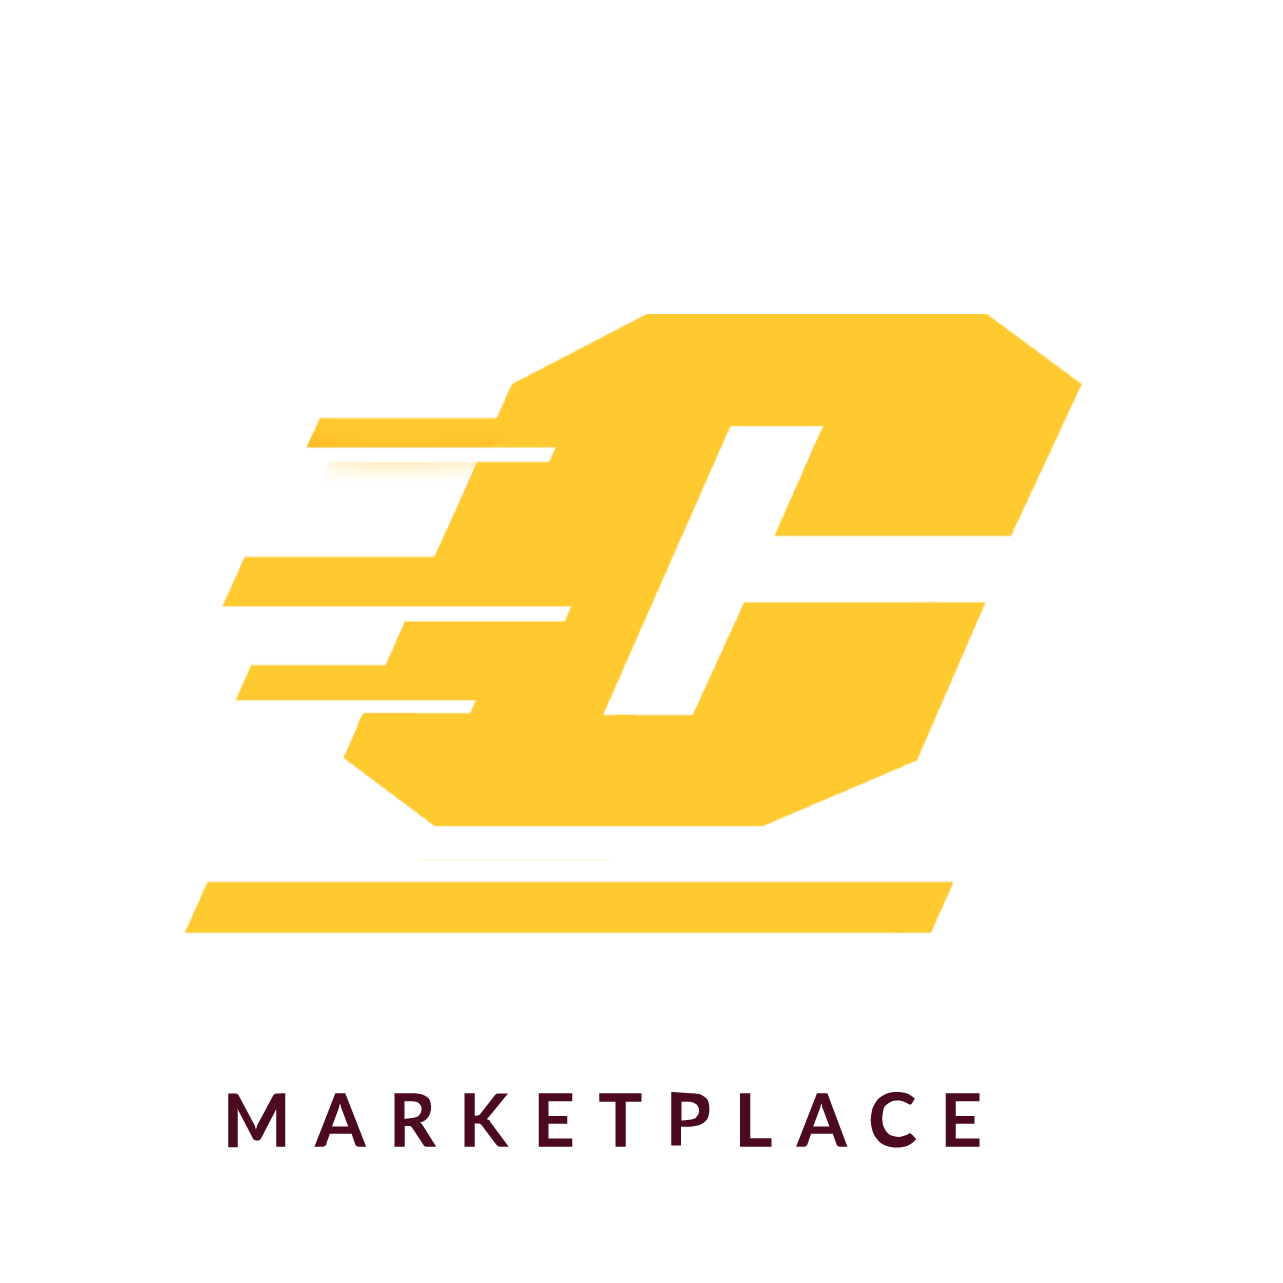 Central Michigan Chippewas marketplace banner logo